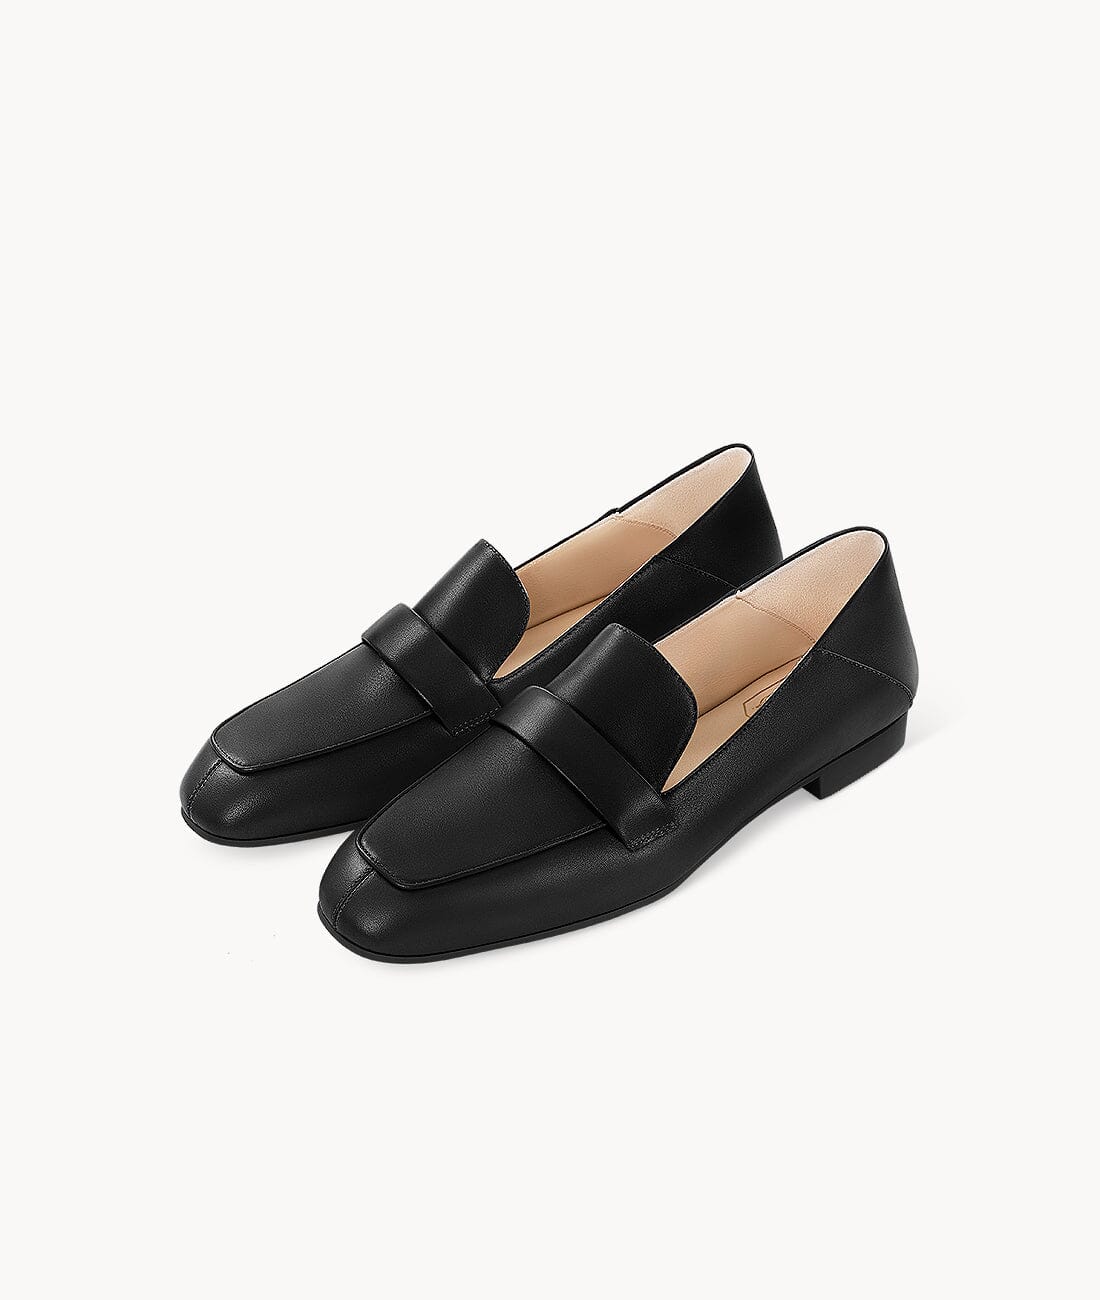 Black Choc Bread Loafers 7or9 